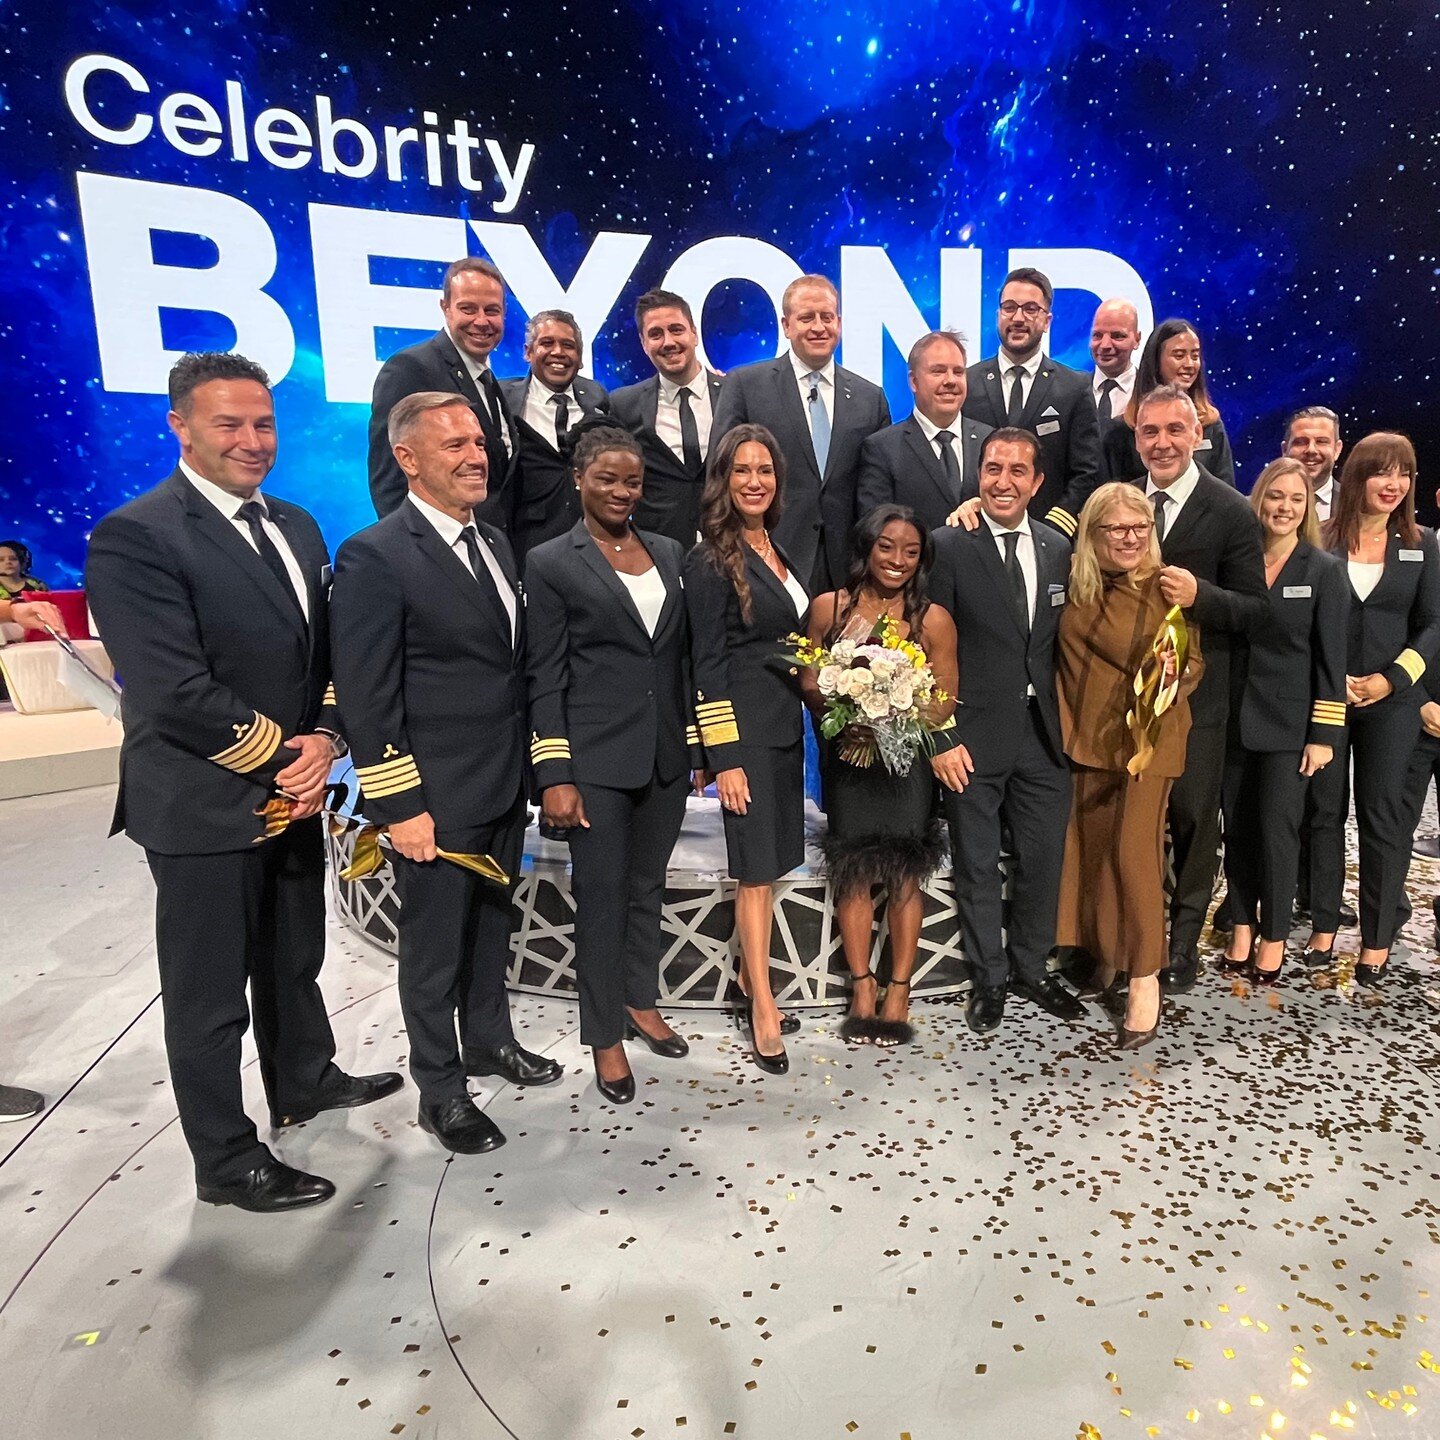 So happy to be a part of this great event and help make this happen. Two GOATs on one stage - Simone Biles and Captain Kate McCue! 
@celebritycruises
#journeywonderfull
#celebritycruises
#celebritybeyond